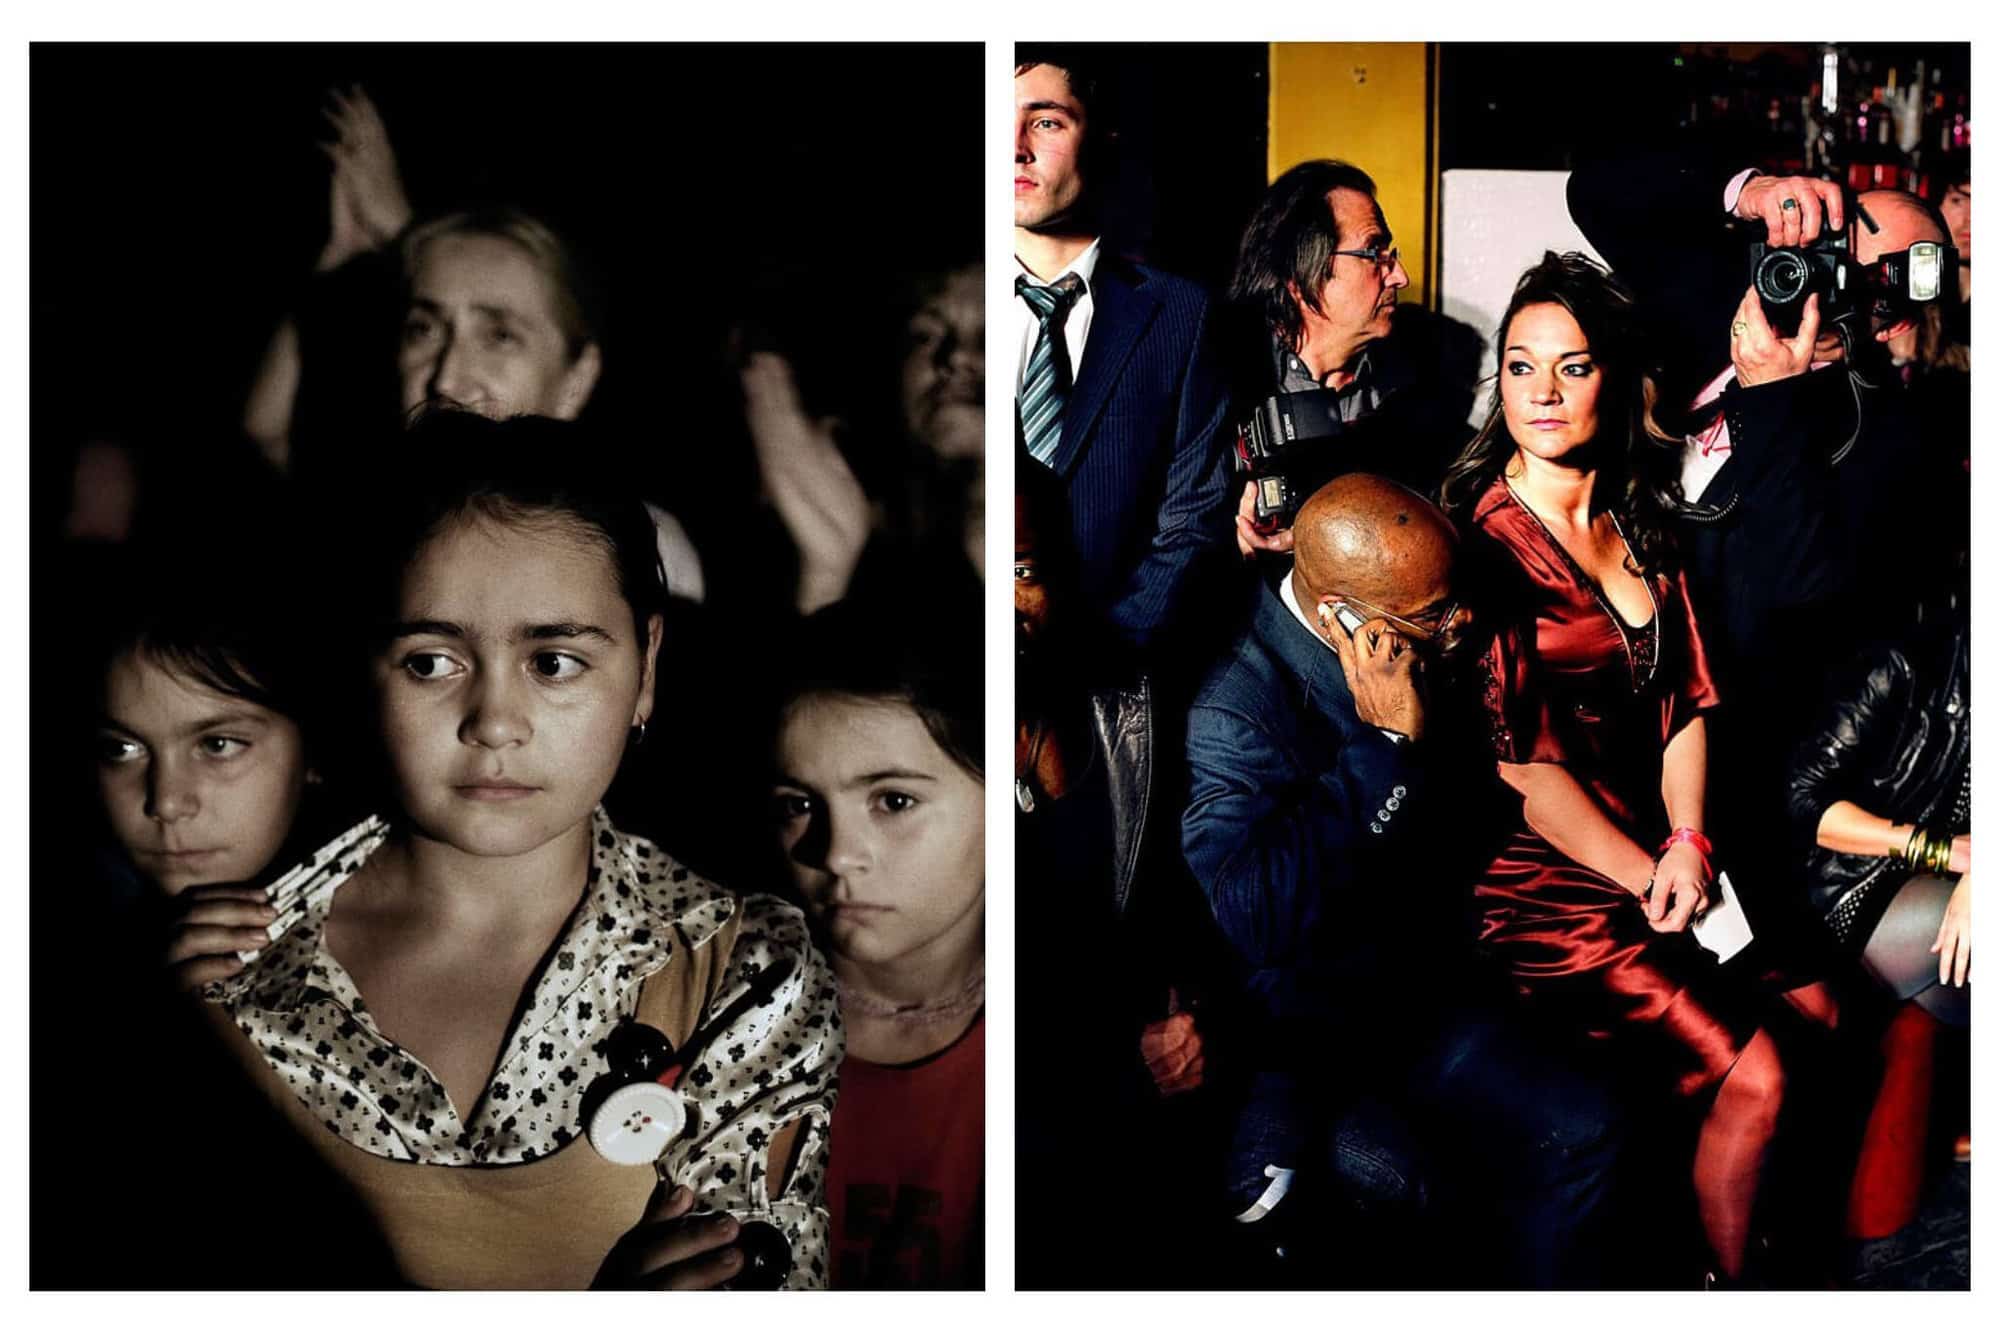 Left: The picture is focused on 3 young girls from South Ossetia, Tskhinvali in Georgia with some adults clapping behind them. Right: A picture of a crowd of spectators, photographers and agents during a fashion show in Paris's fashion week.